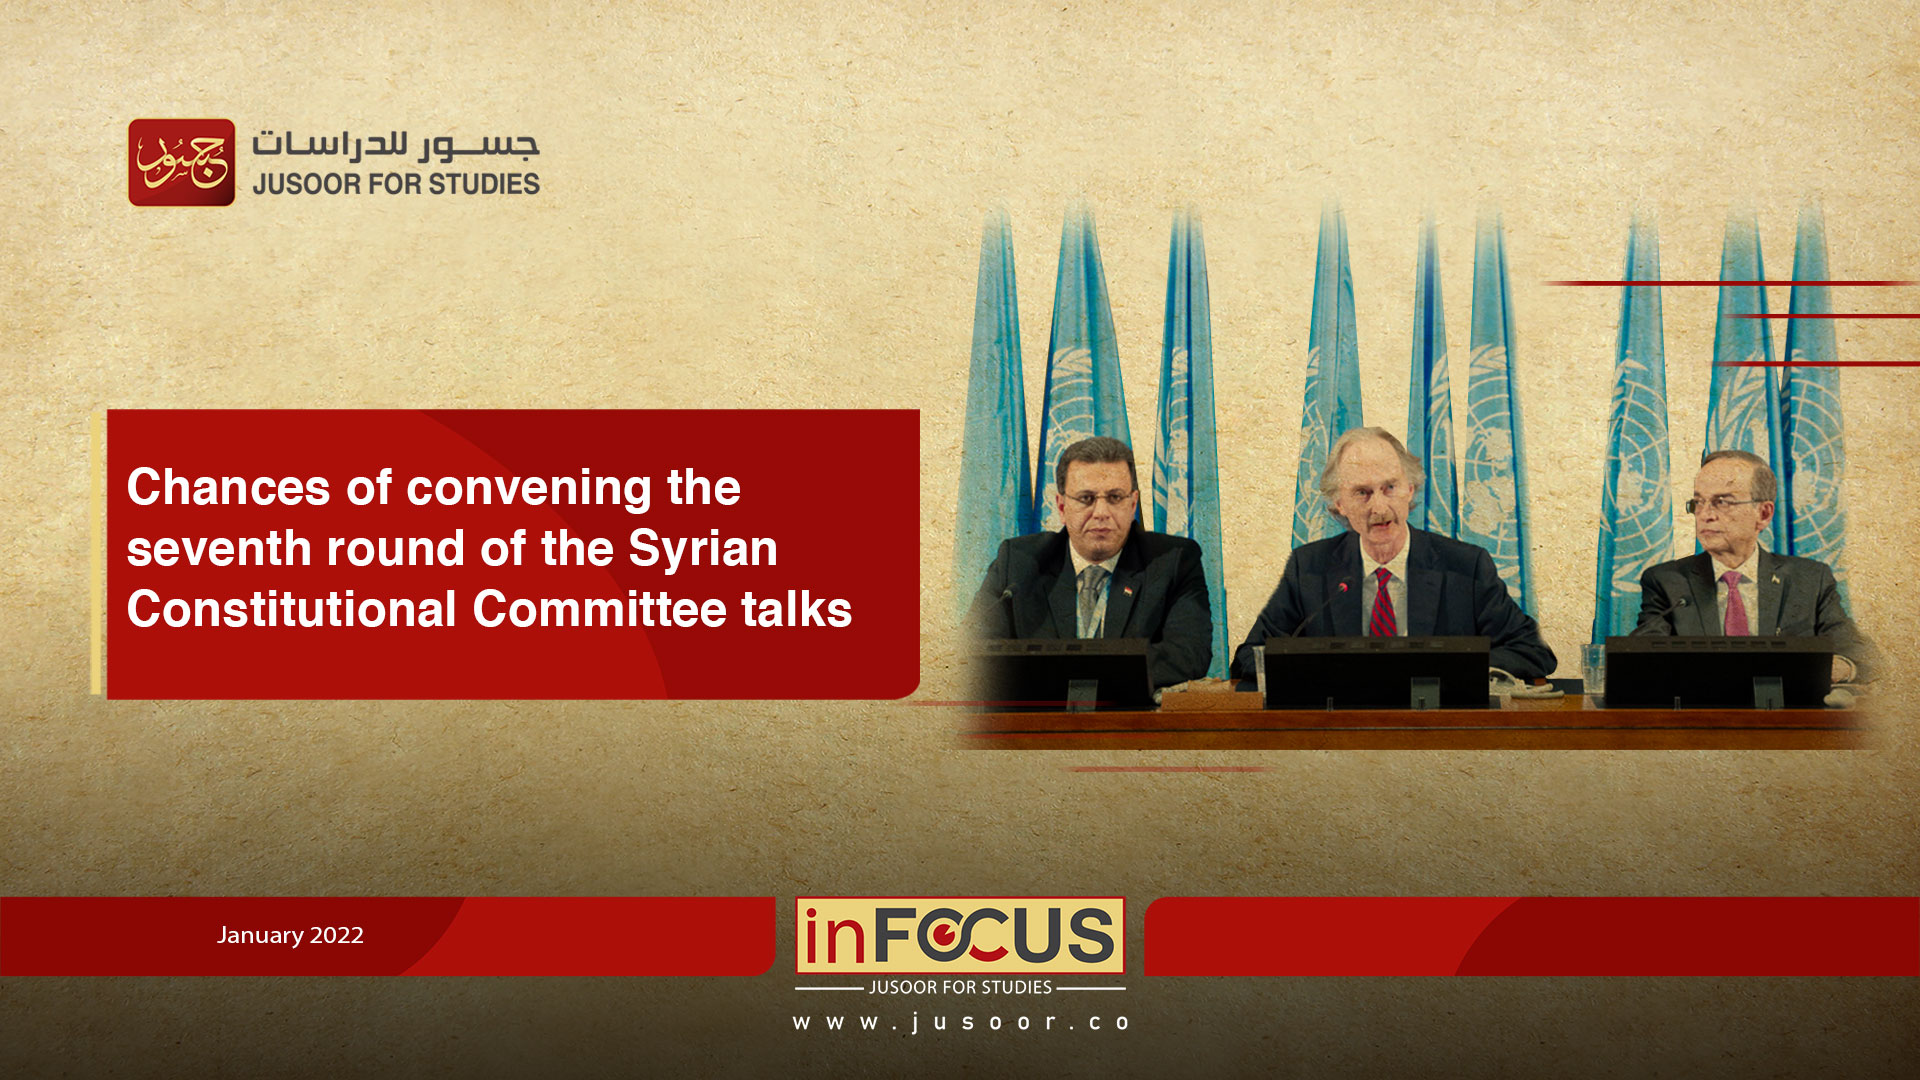 Chances of convening the seventh round of the Syrian Constitutional Committee talks